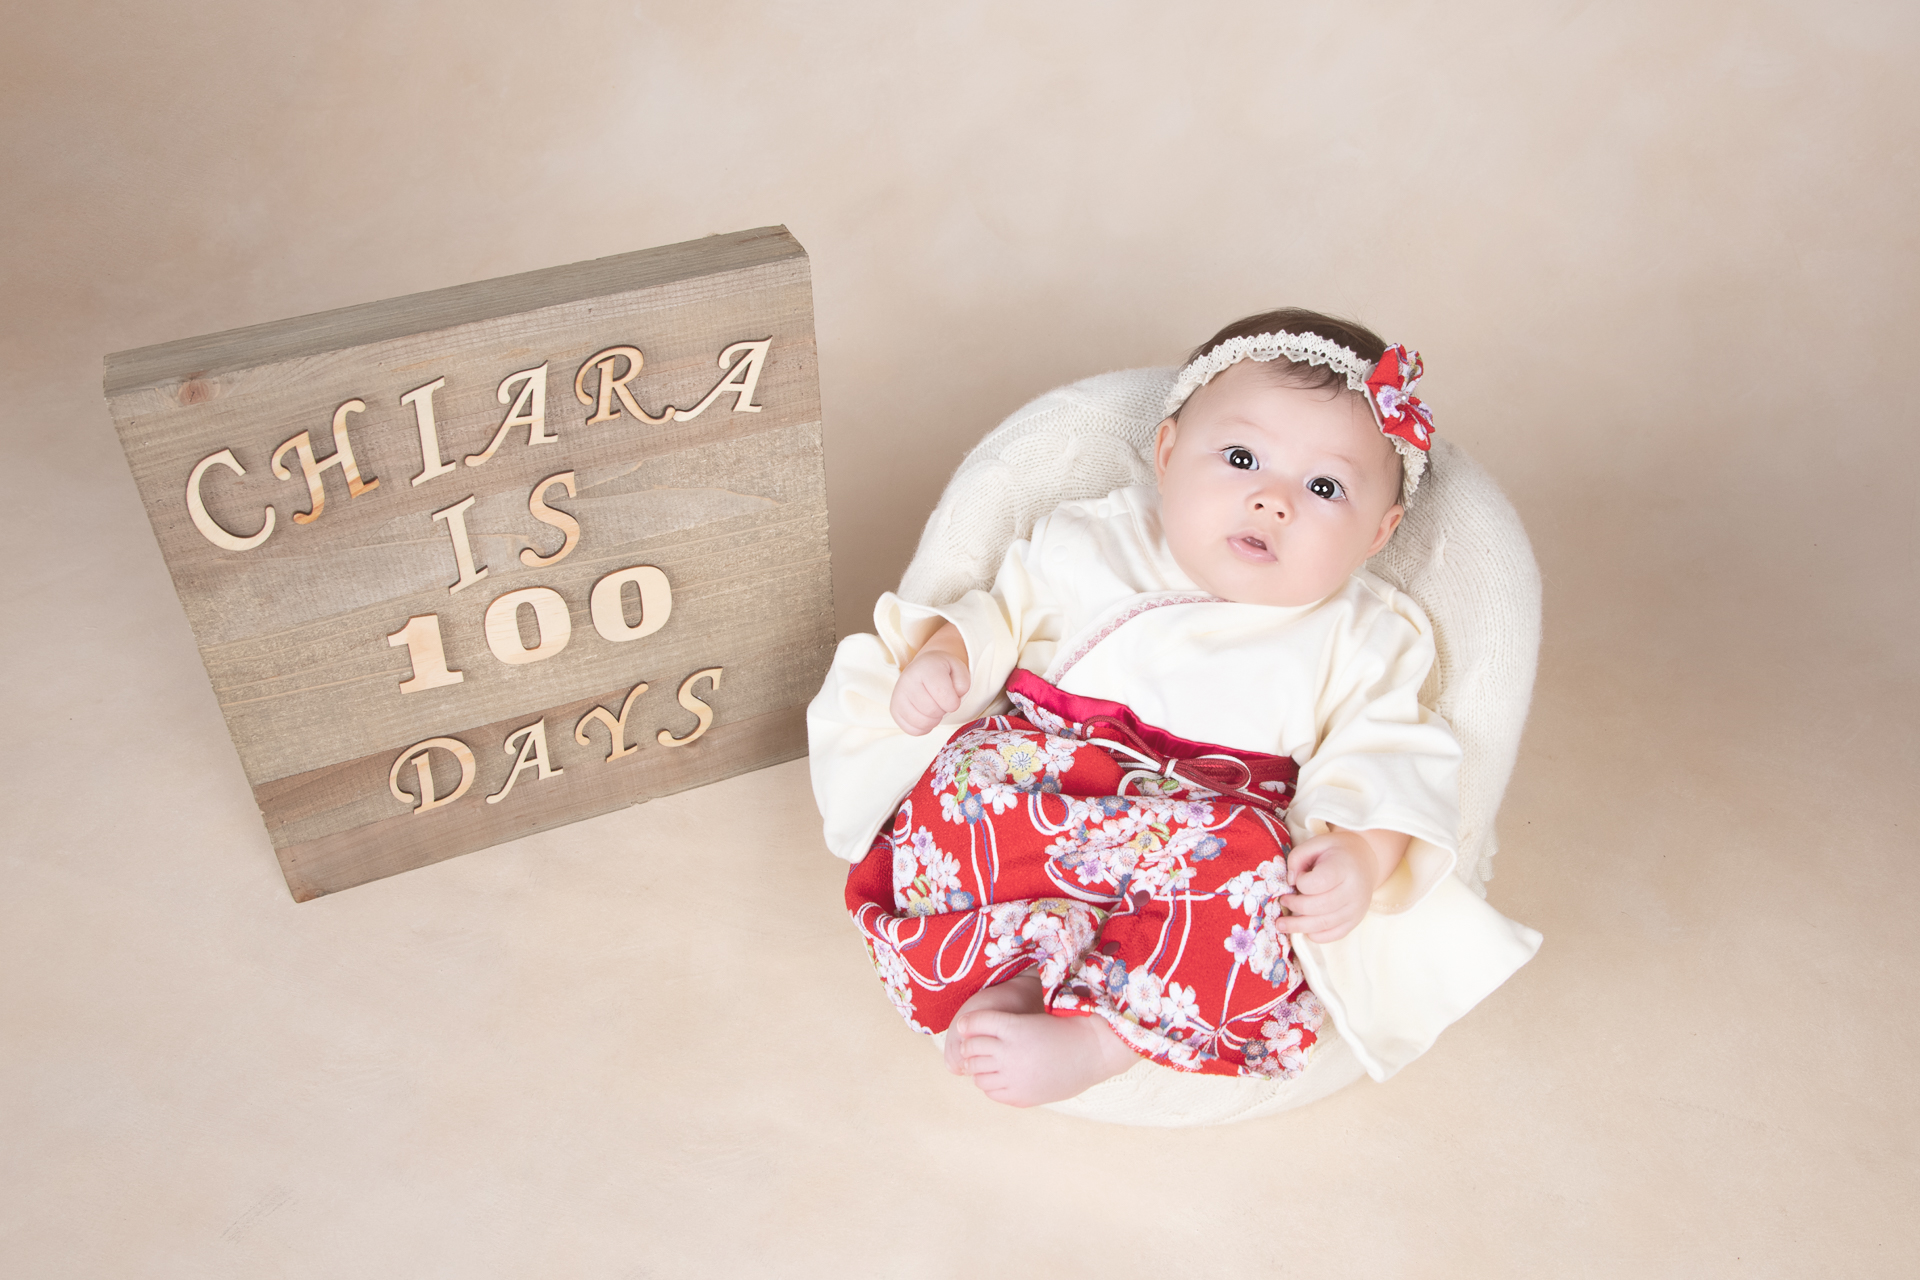 Baby girl rest on light colored prop wearing light colored and red dress and headband. Sign next to her shows "Chiara is 100 days"